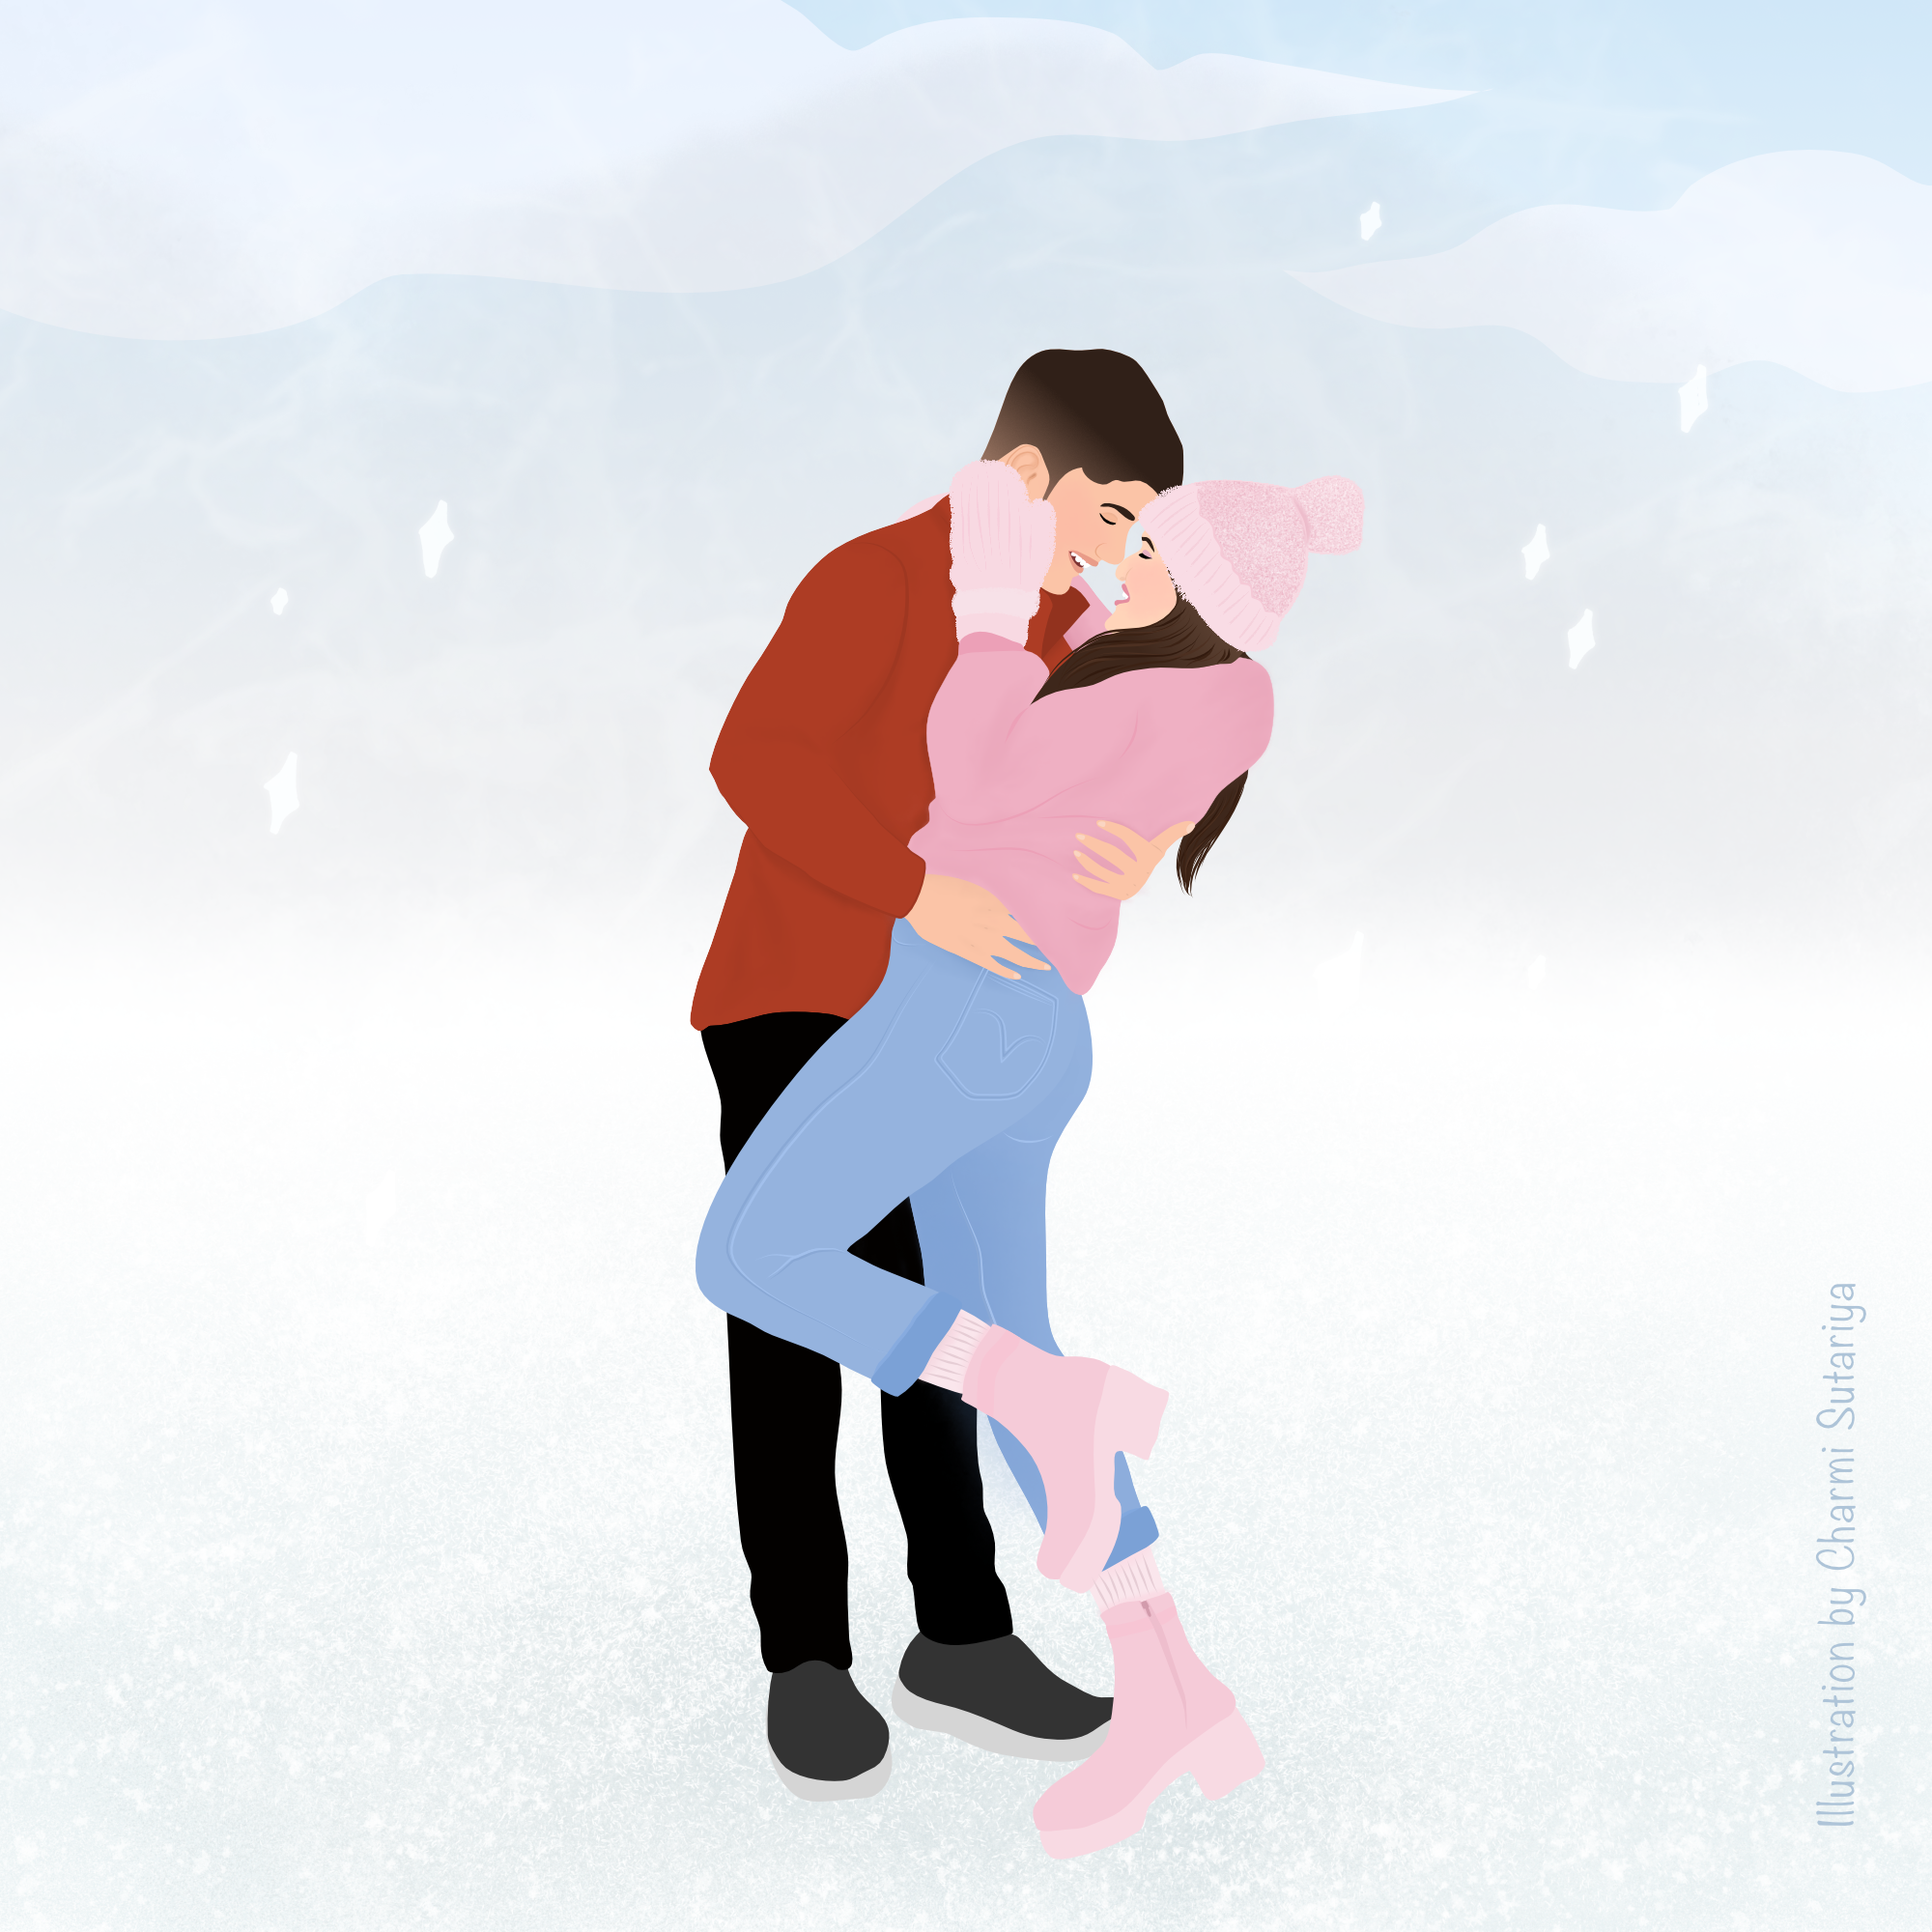 Love is in the air! This is a romantic portrait illustration of a young couple making love in the winter wonderland.